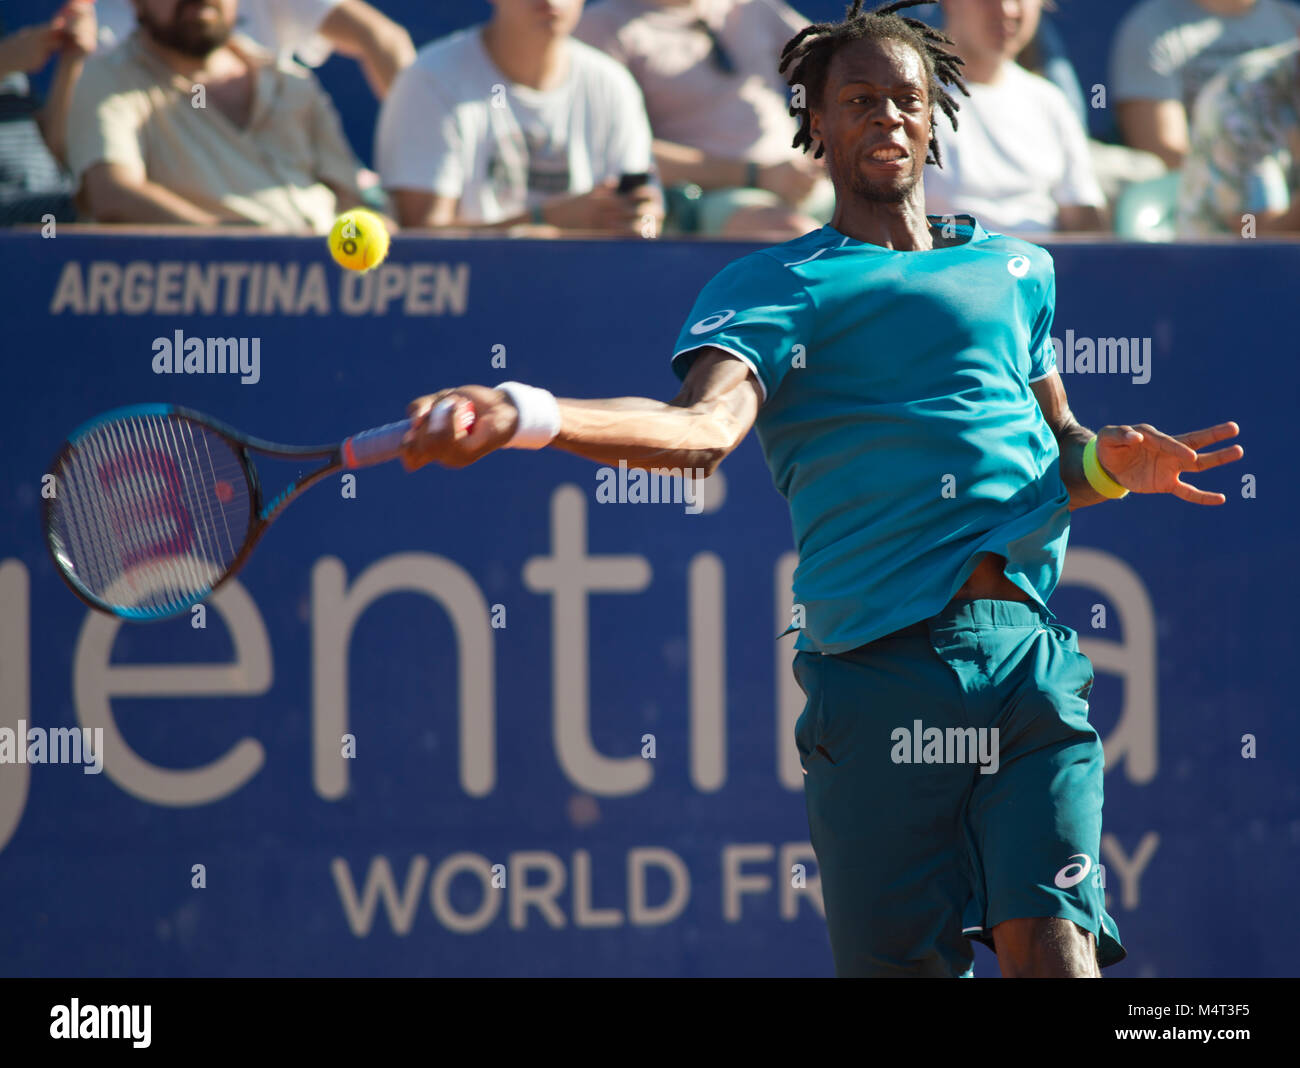 Gael Monfils (France) - Argentina Open 2018 Credit: Mariano Garcia/Alamy Live News Stock Photo